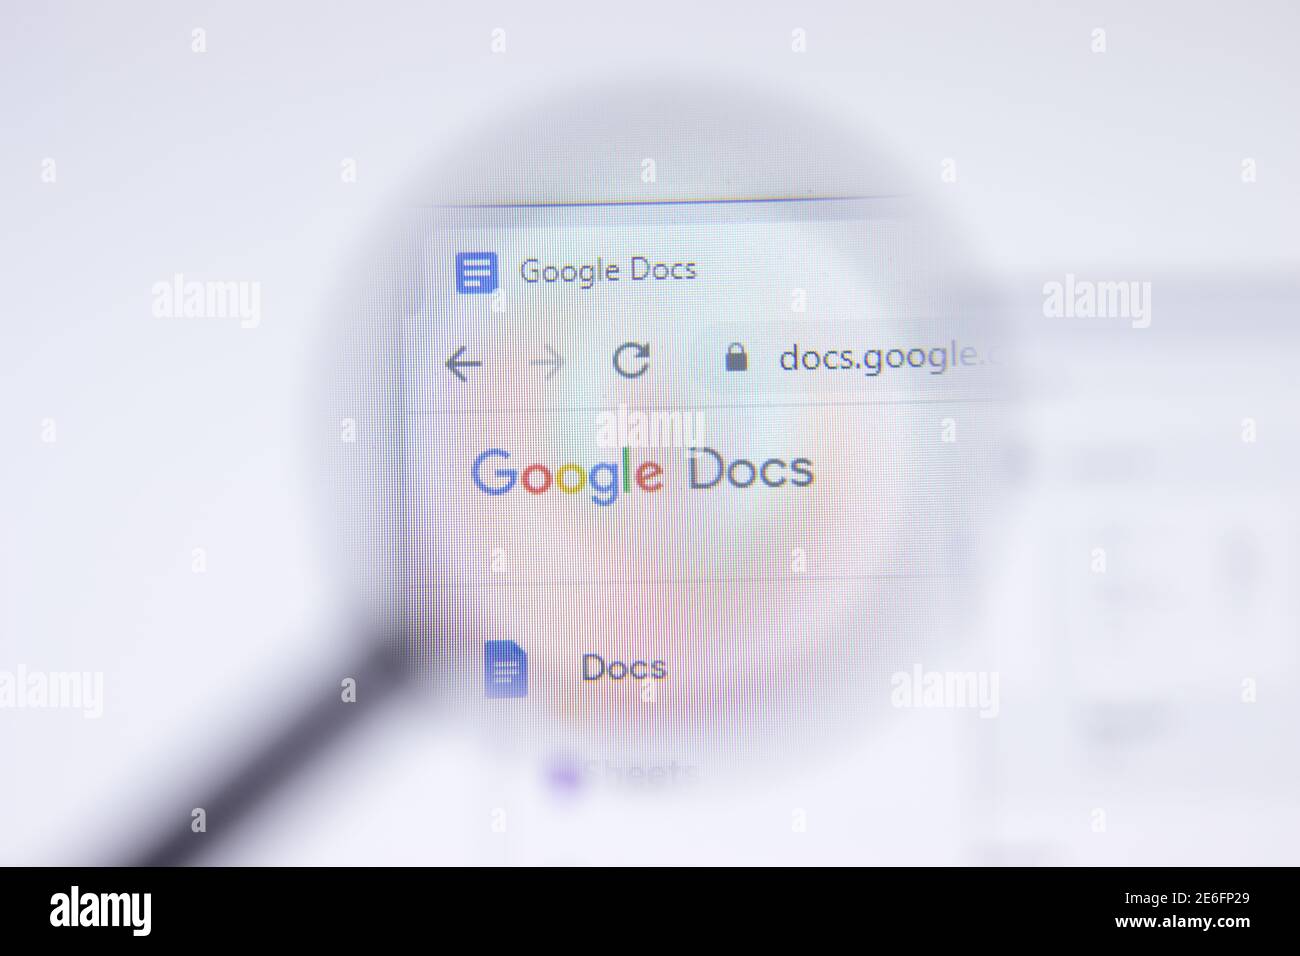 Saint Petersburg, Russia - 28 January 2021: Google Docs website page with logo close-up, Illustrative Editorial Stock Photo